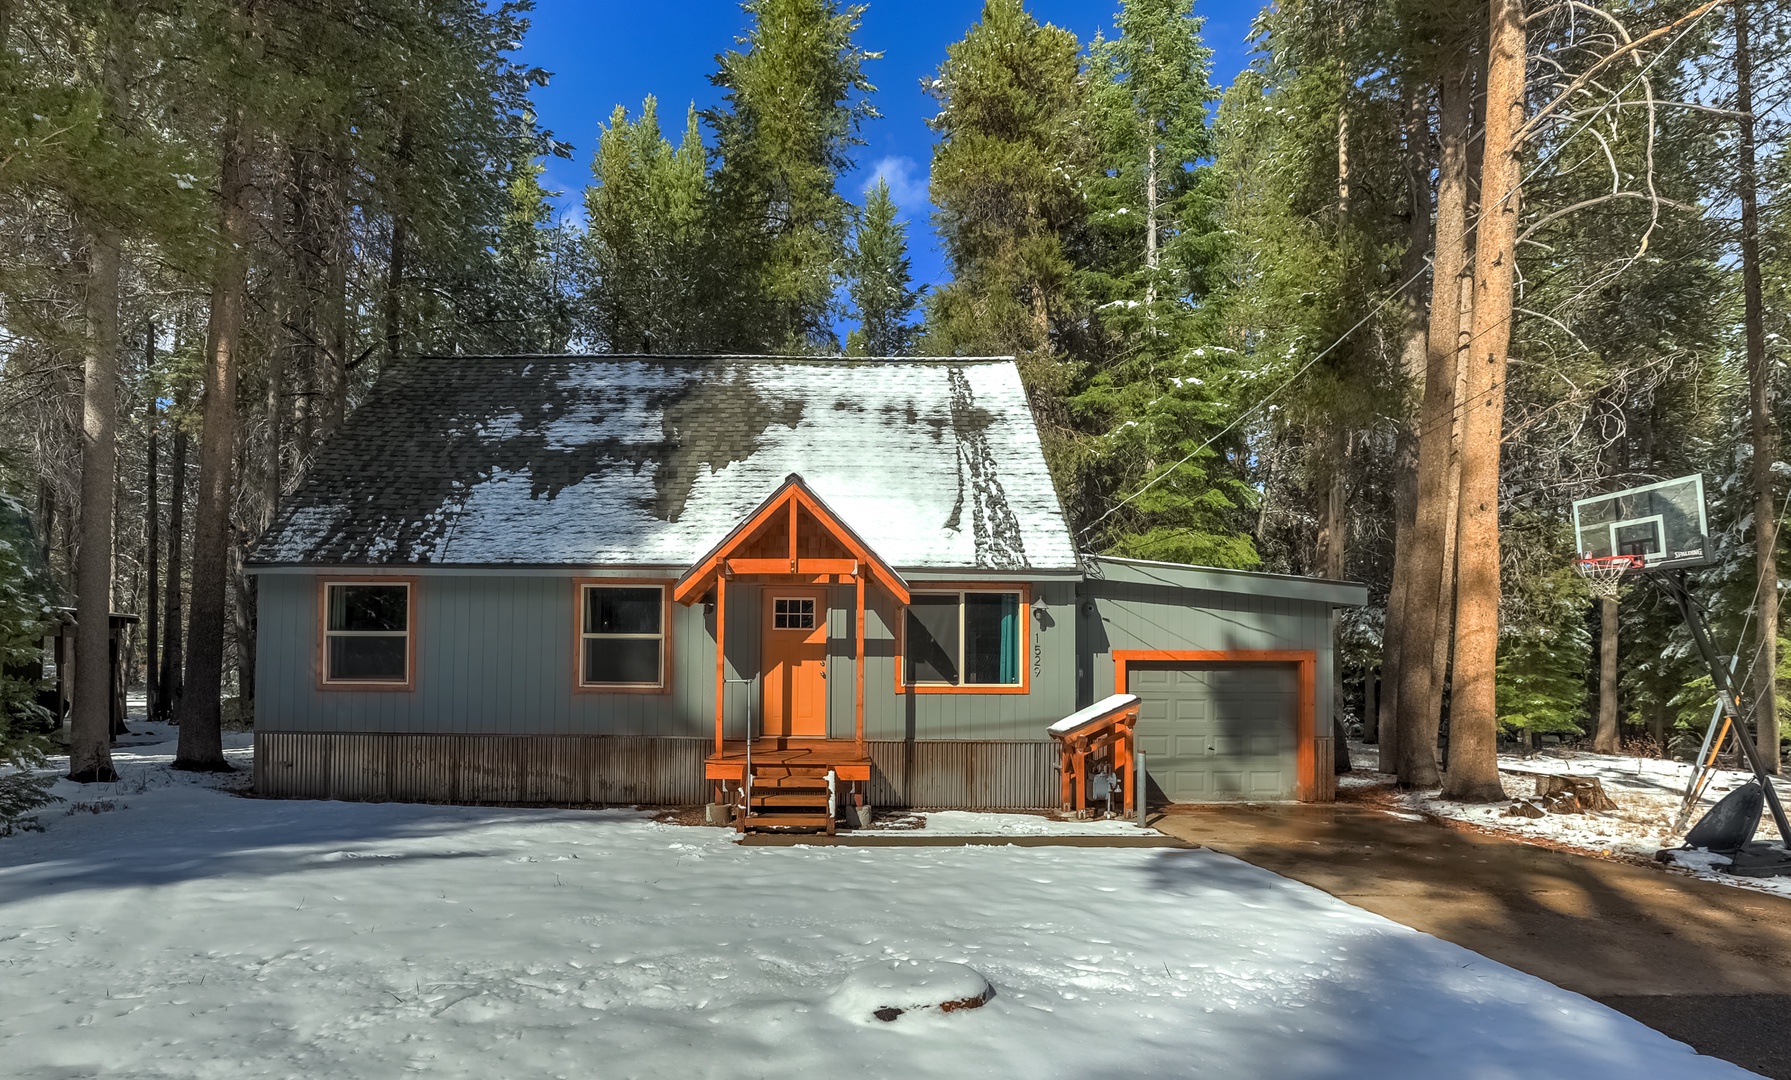 This quaint South Lake Tahoe cabin offers parking for 2 vehicles